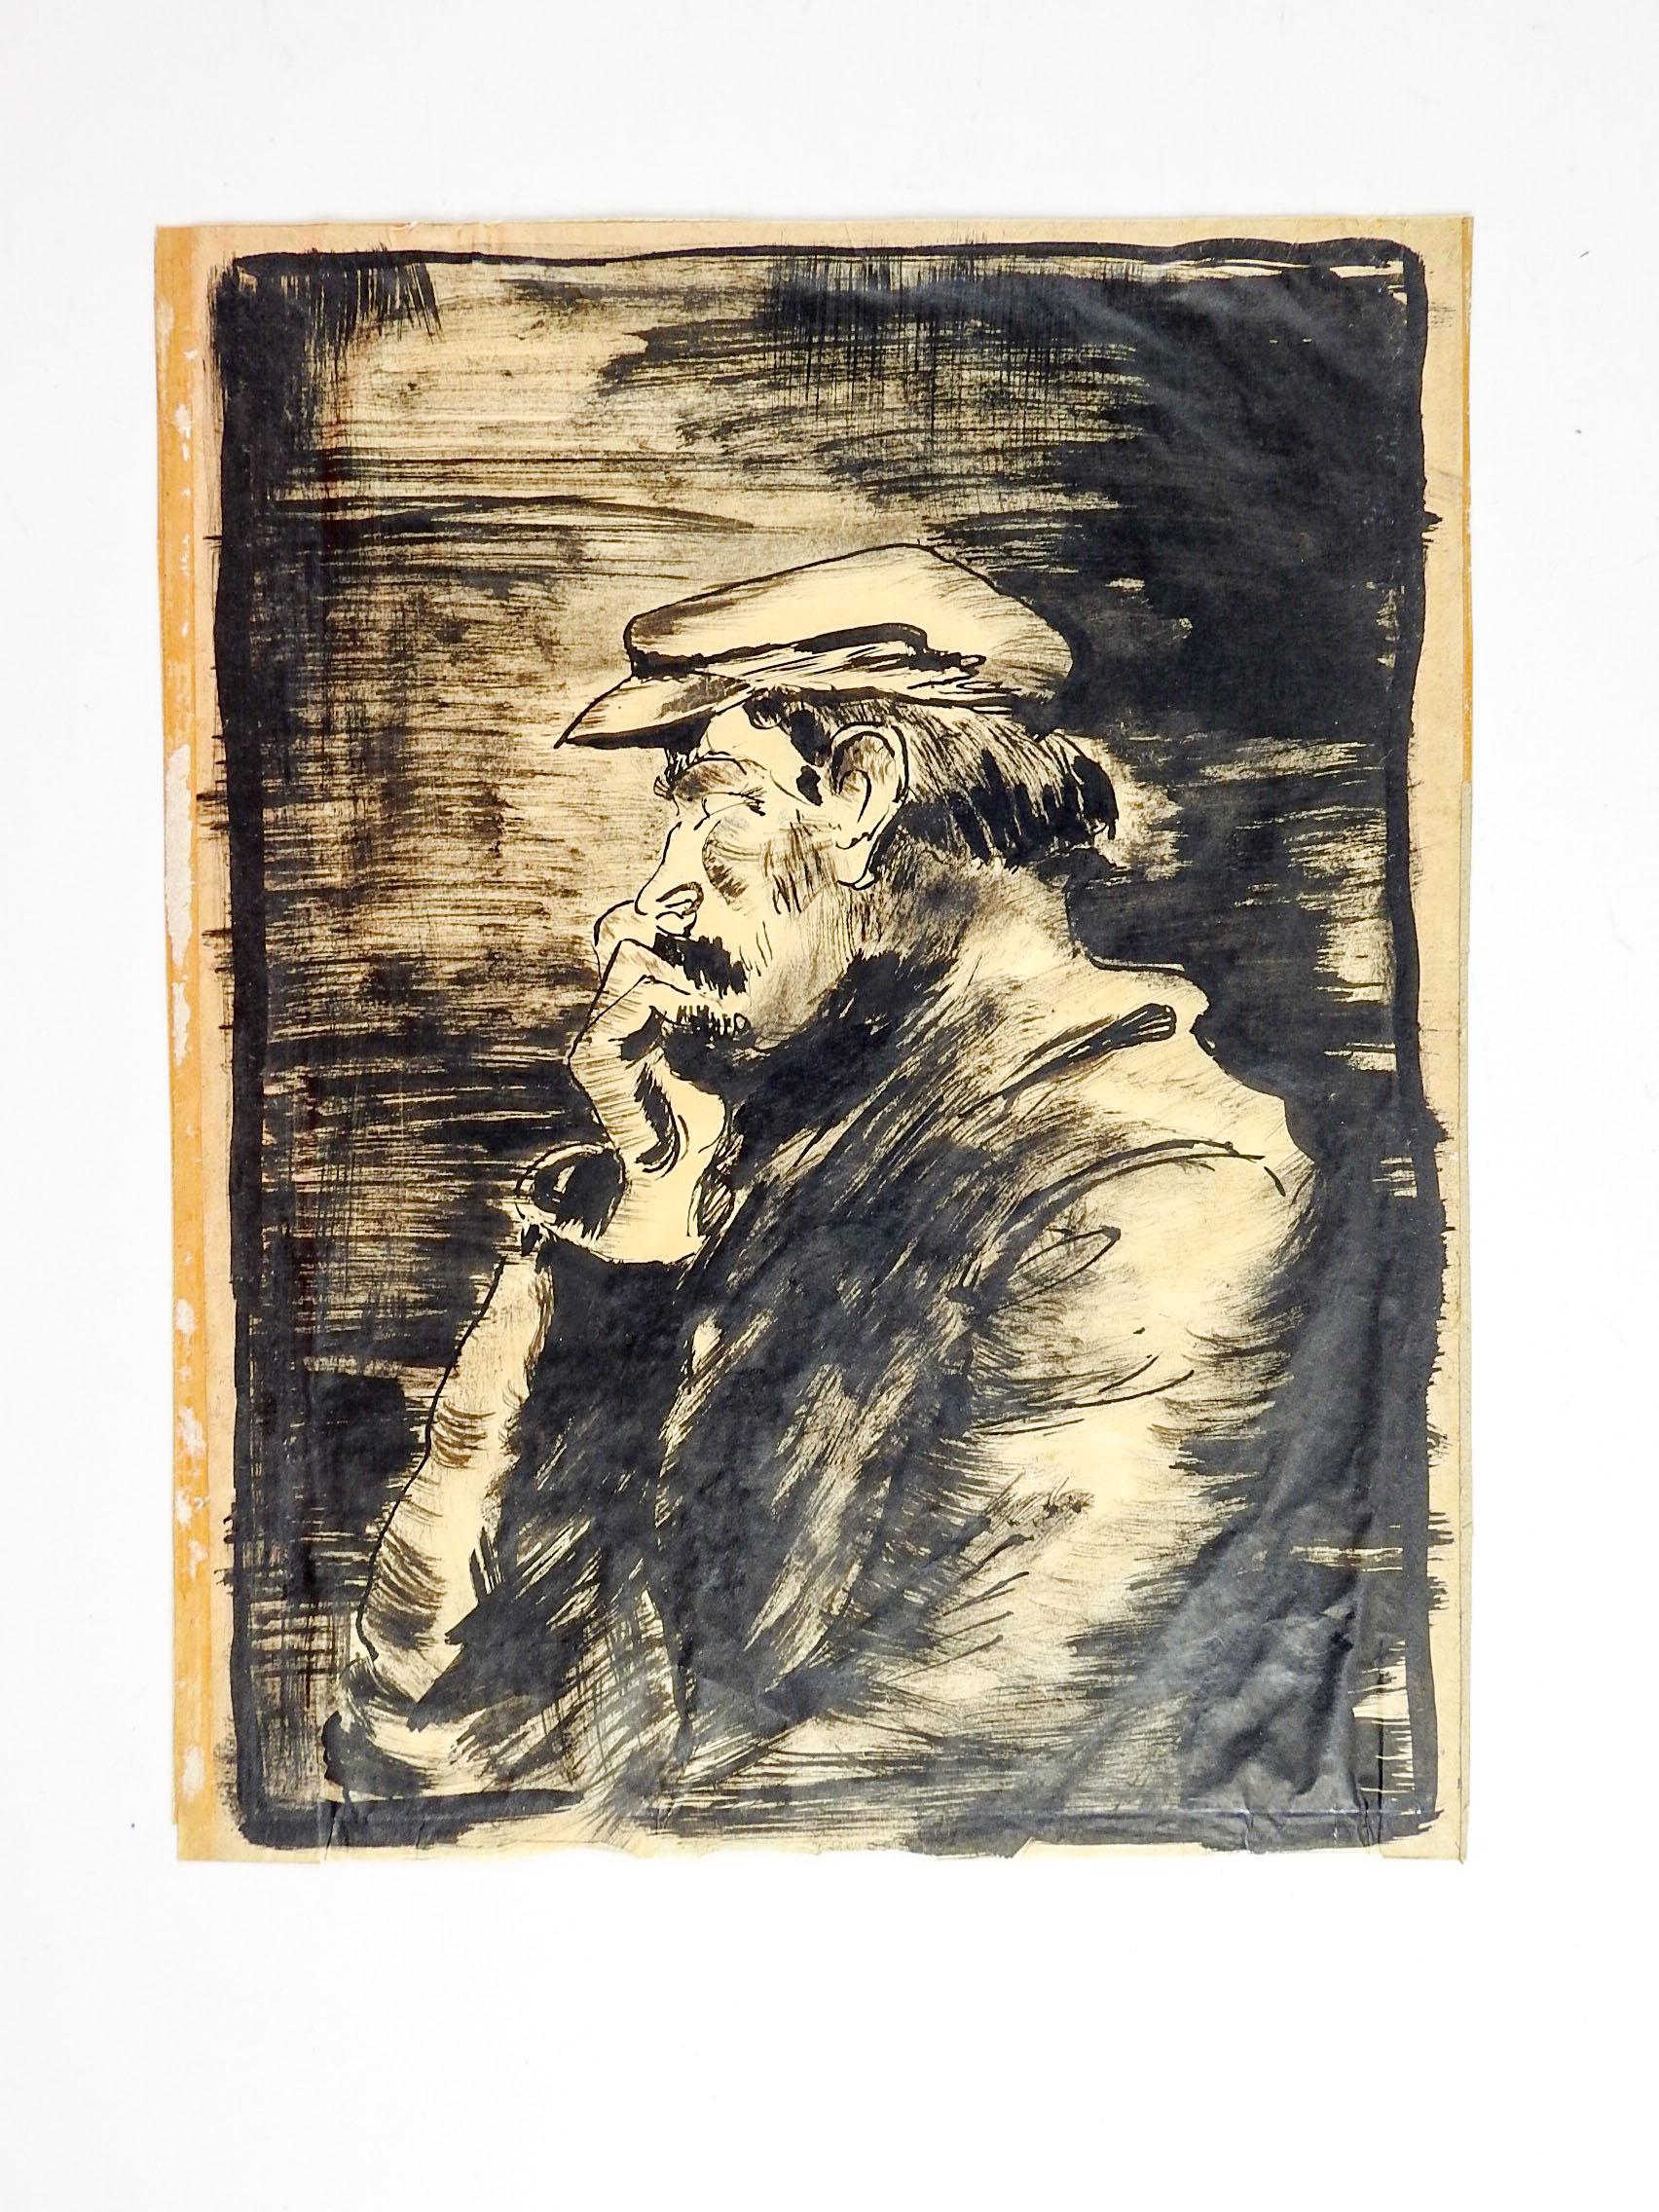 Circa 1930's ink wash on thin paper study of bearded man. Unsigned, age toning, tape residue along edges, some cockling to paper.